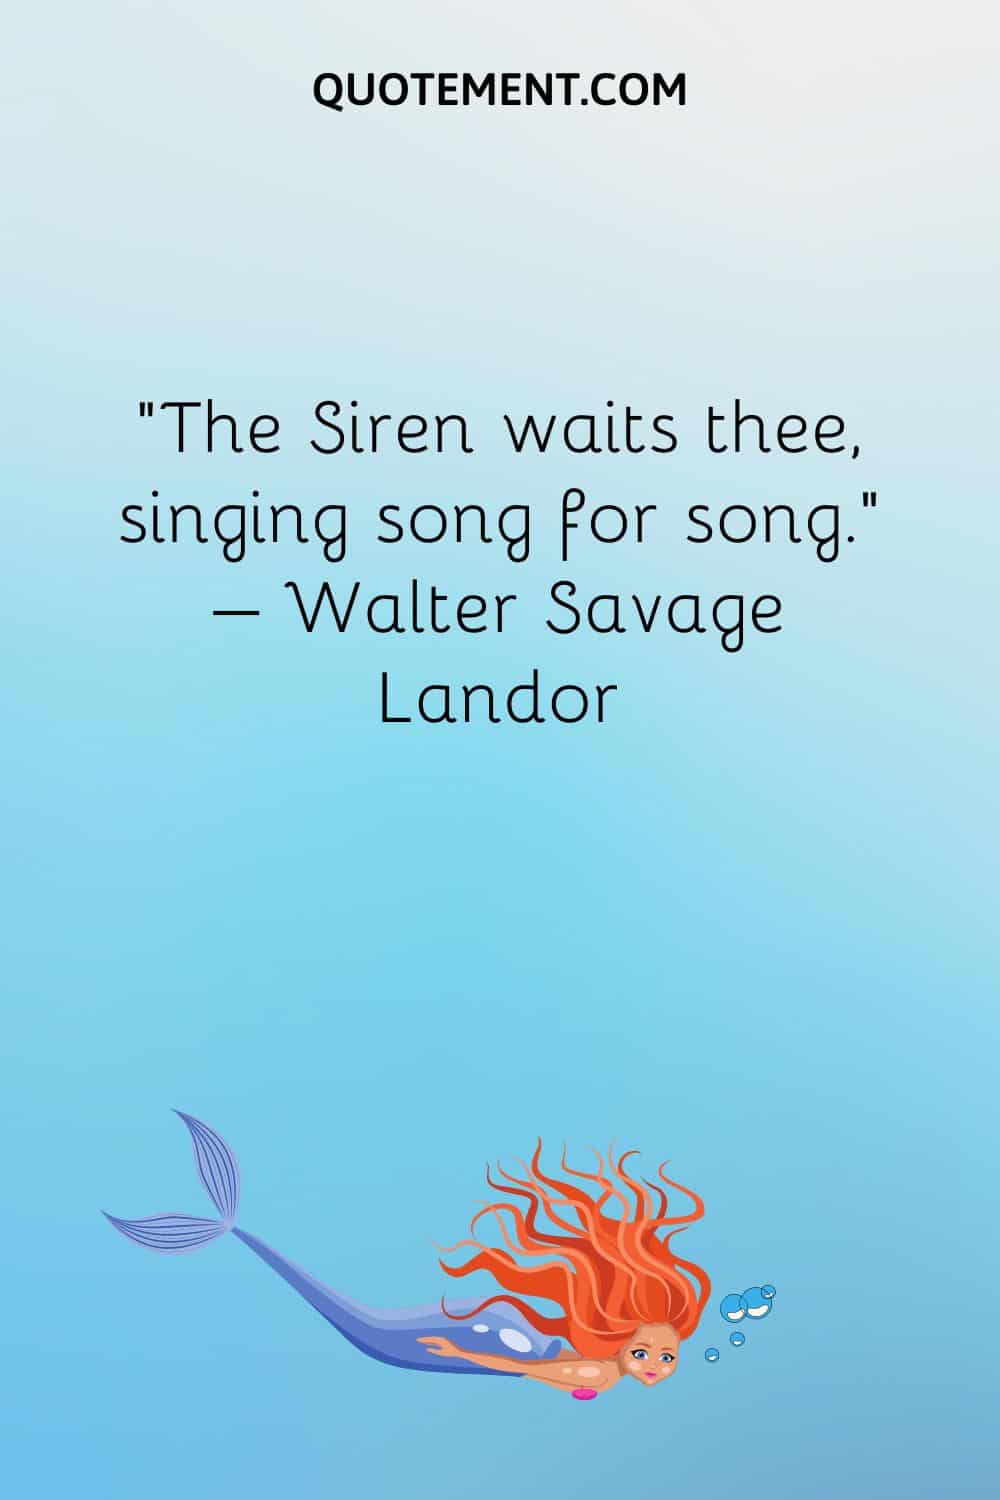 “The Siren waits thee, singing song for song.” – Walter Savage Landor